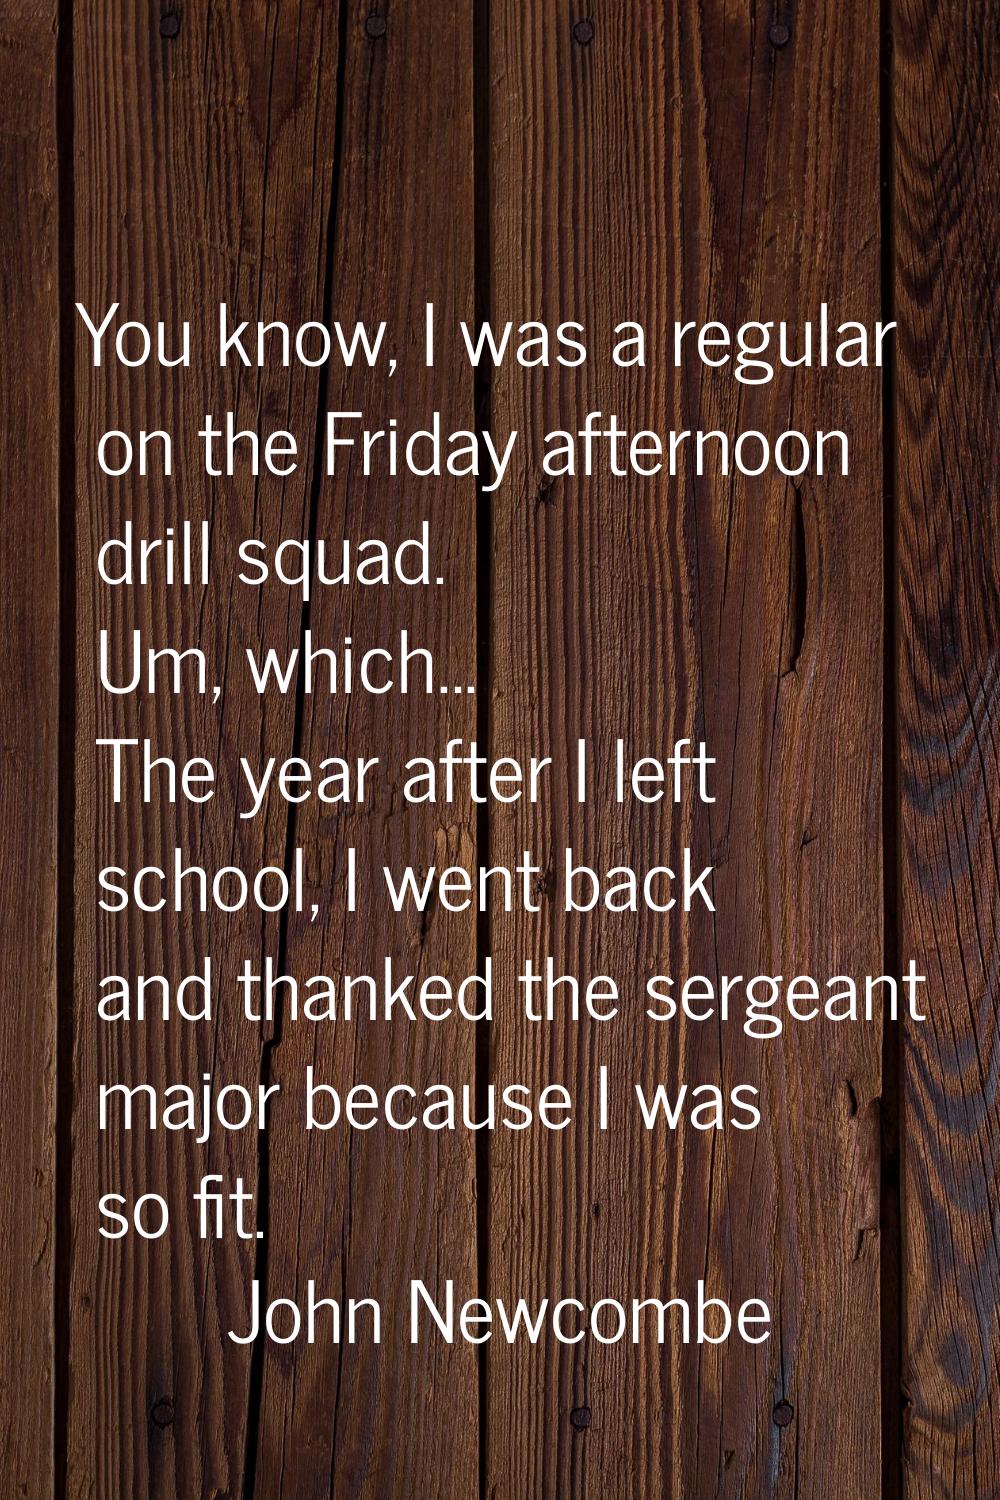 You know, I was a regular on the Friday afternoon drill squad. Um, which... The year after I left s